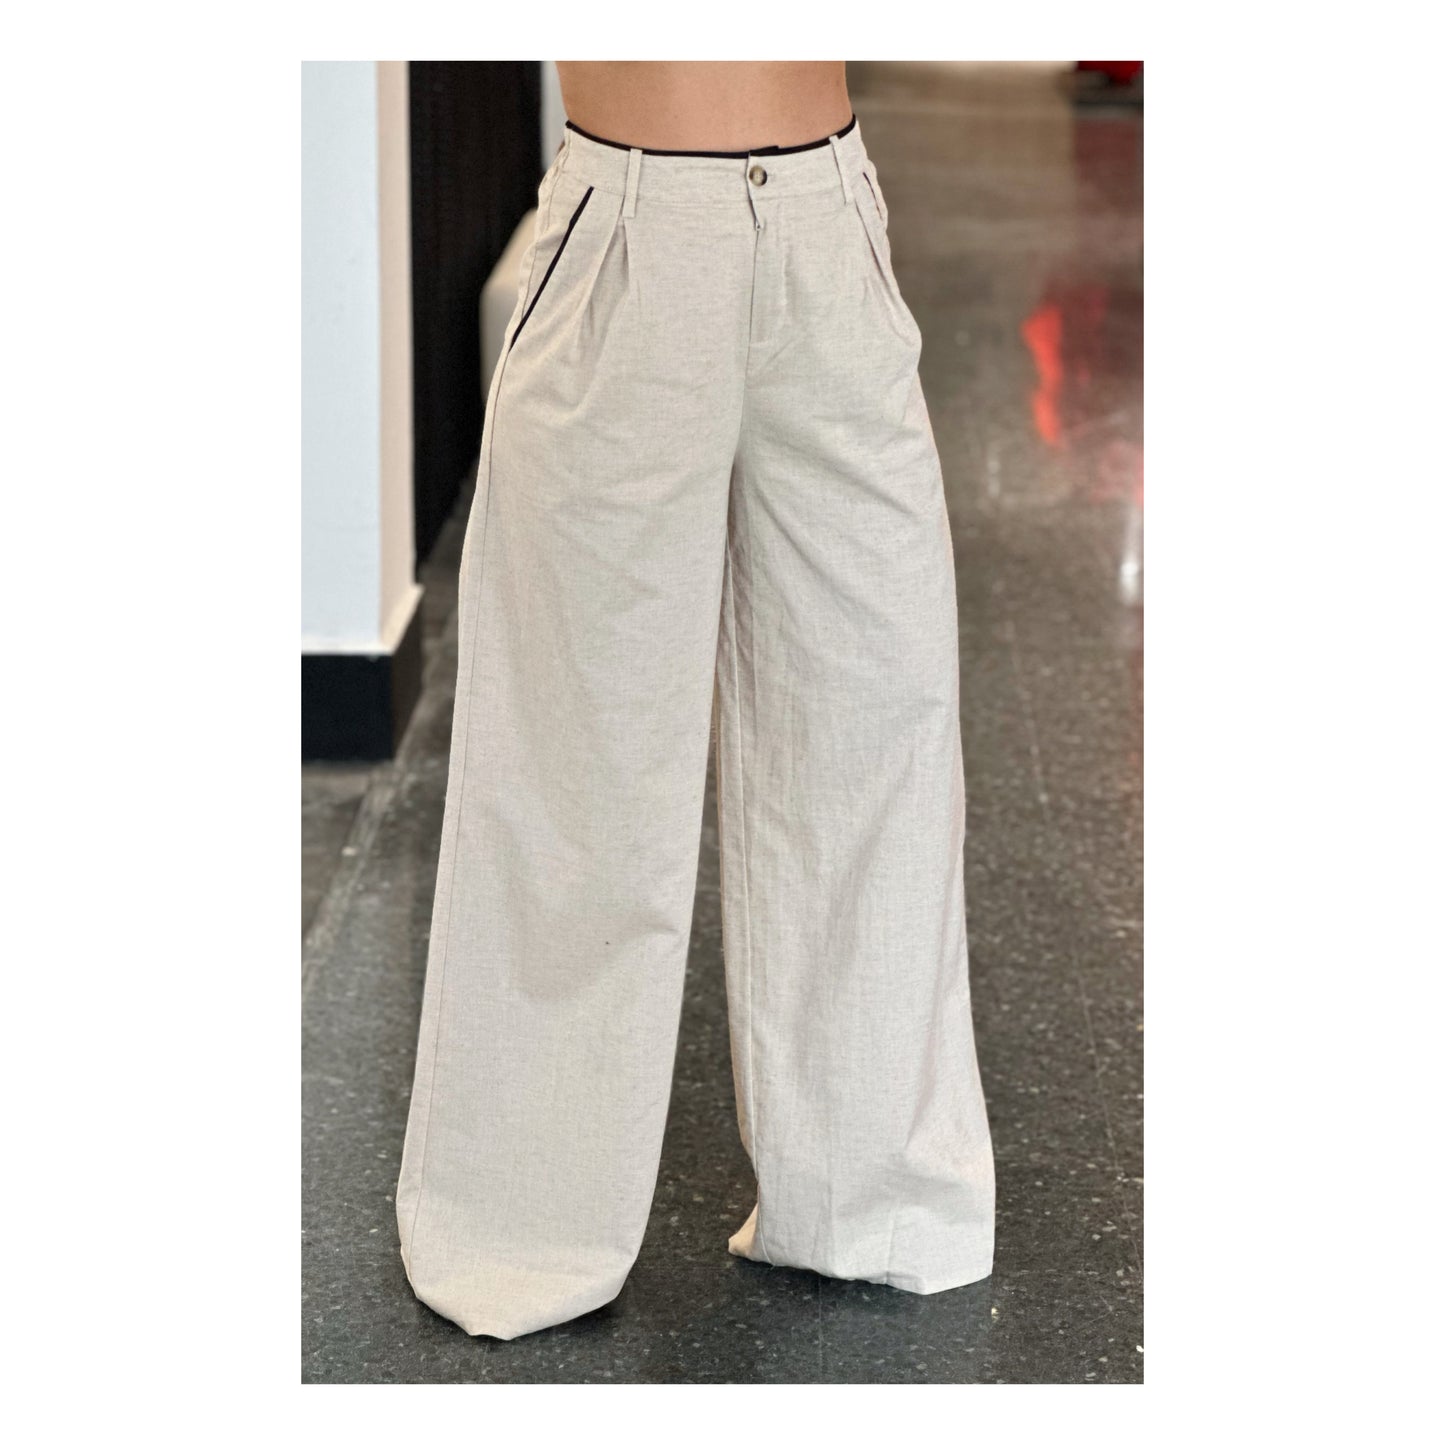 LIGHT TAUPE/BLACK CONTRAST PIPING DETAILED LINEN PANTS